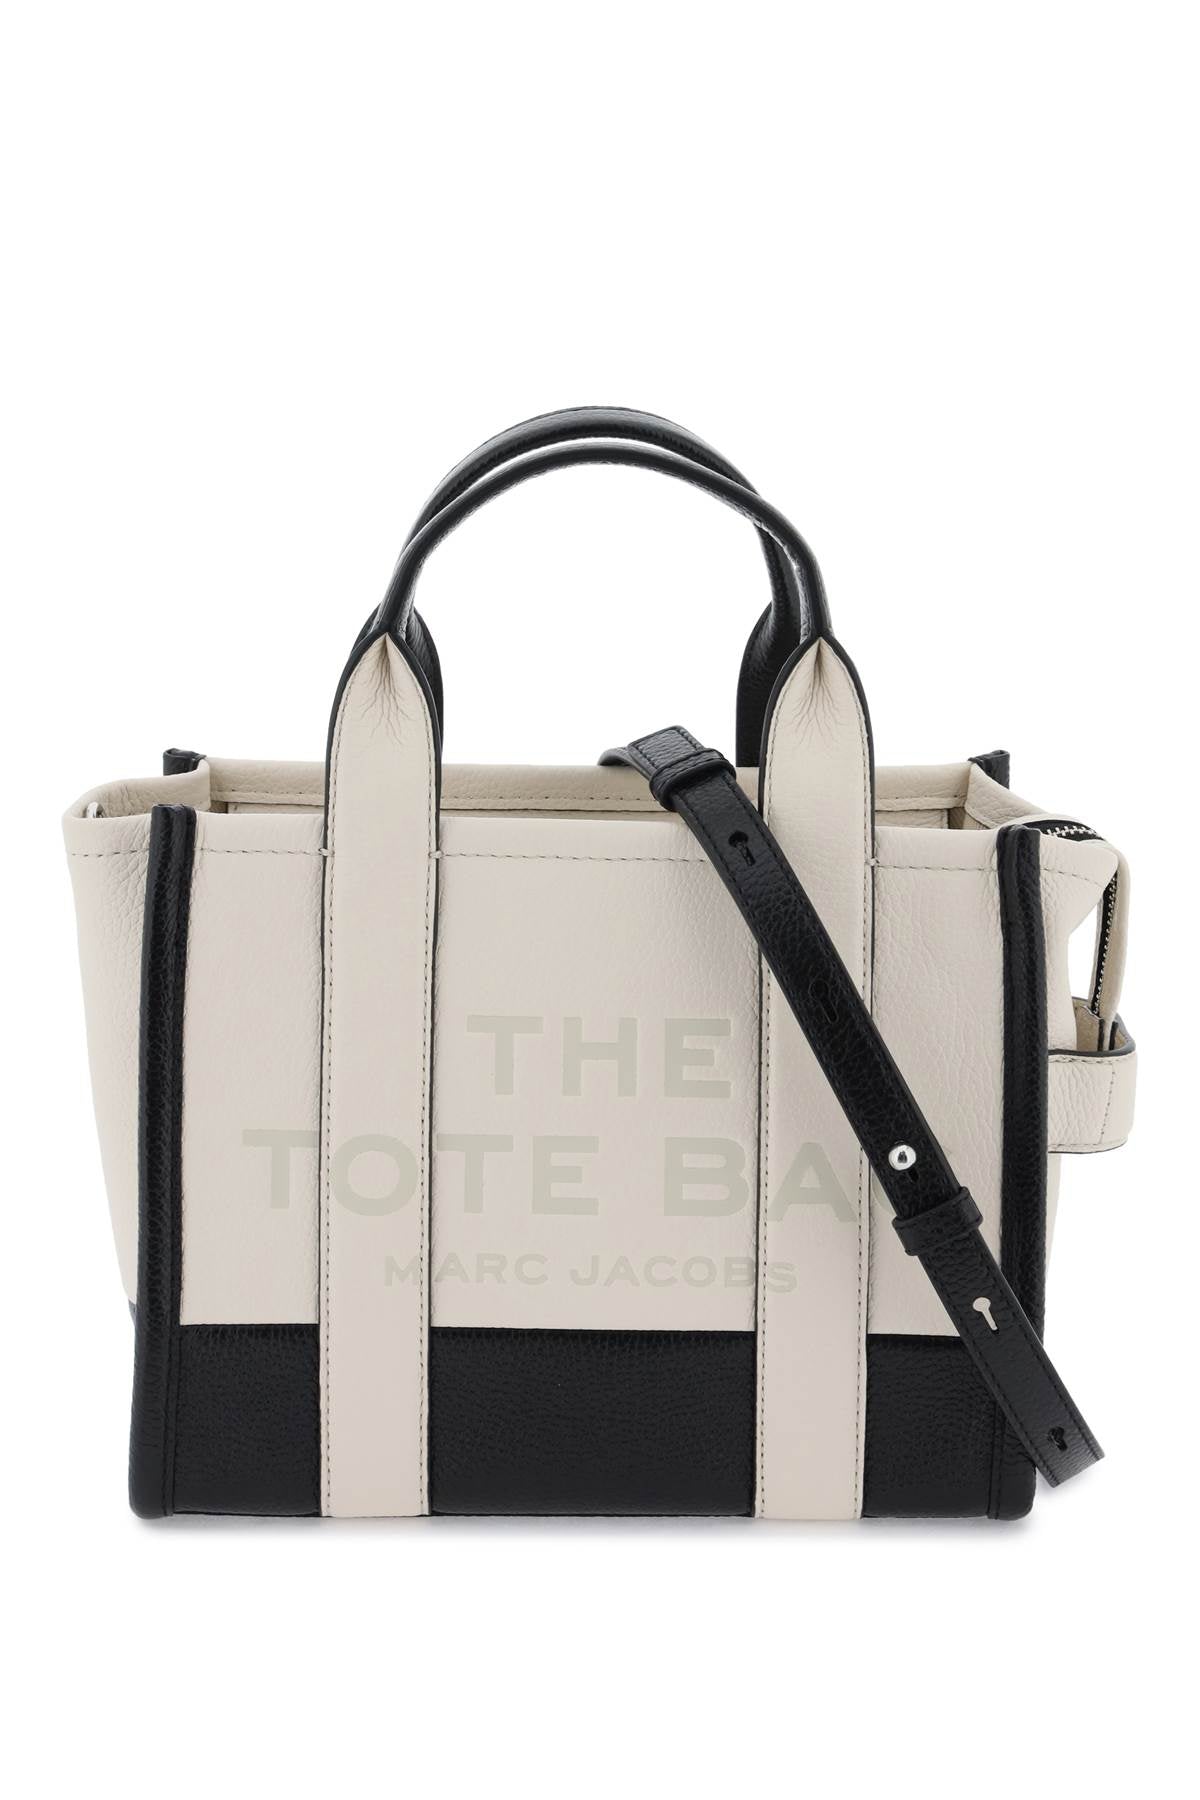 MARC JACOBS Colorblock Mini Tote Handbag in Two-Tone Grained Leather with Adjustable Strap and Silver Hardware